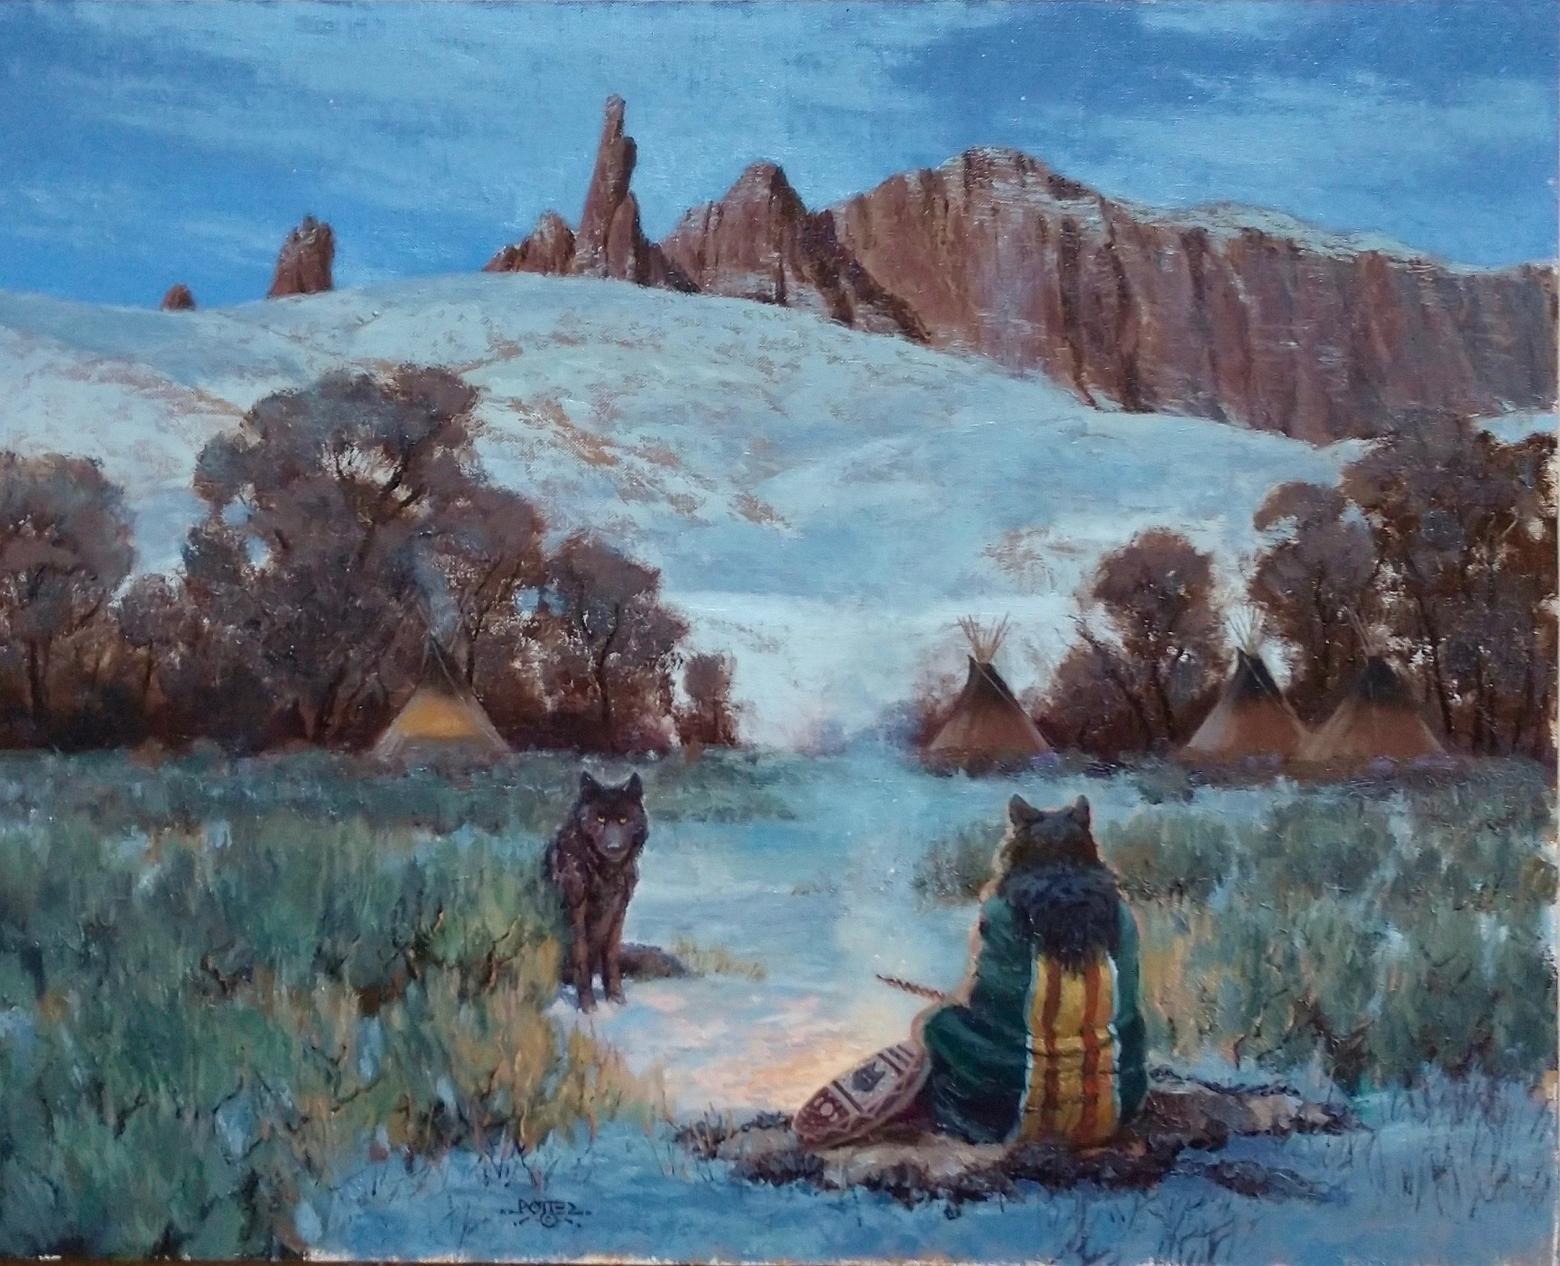 Potter's painting, "A Private Conversation," is part of a series of works intended to reveal the ancient stories rooted in aboriginal oral traditions, which speak to the unbreakable relationships between people and wildlife. Image courtesy John Potter